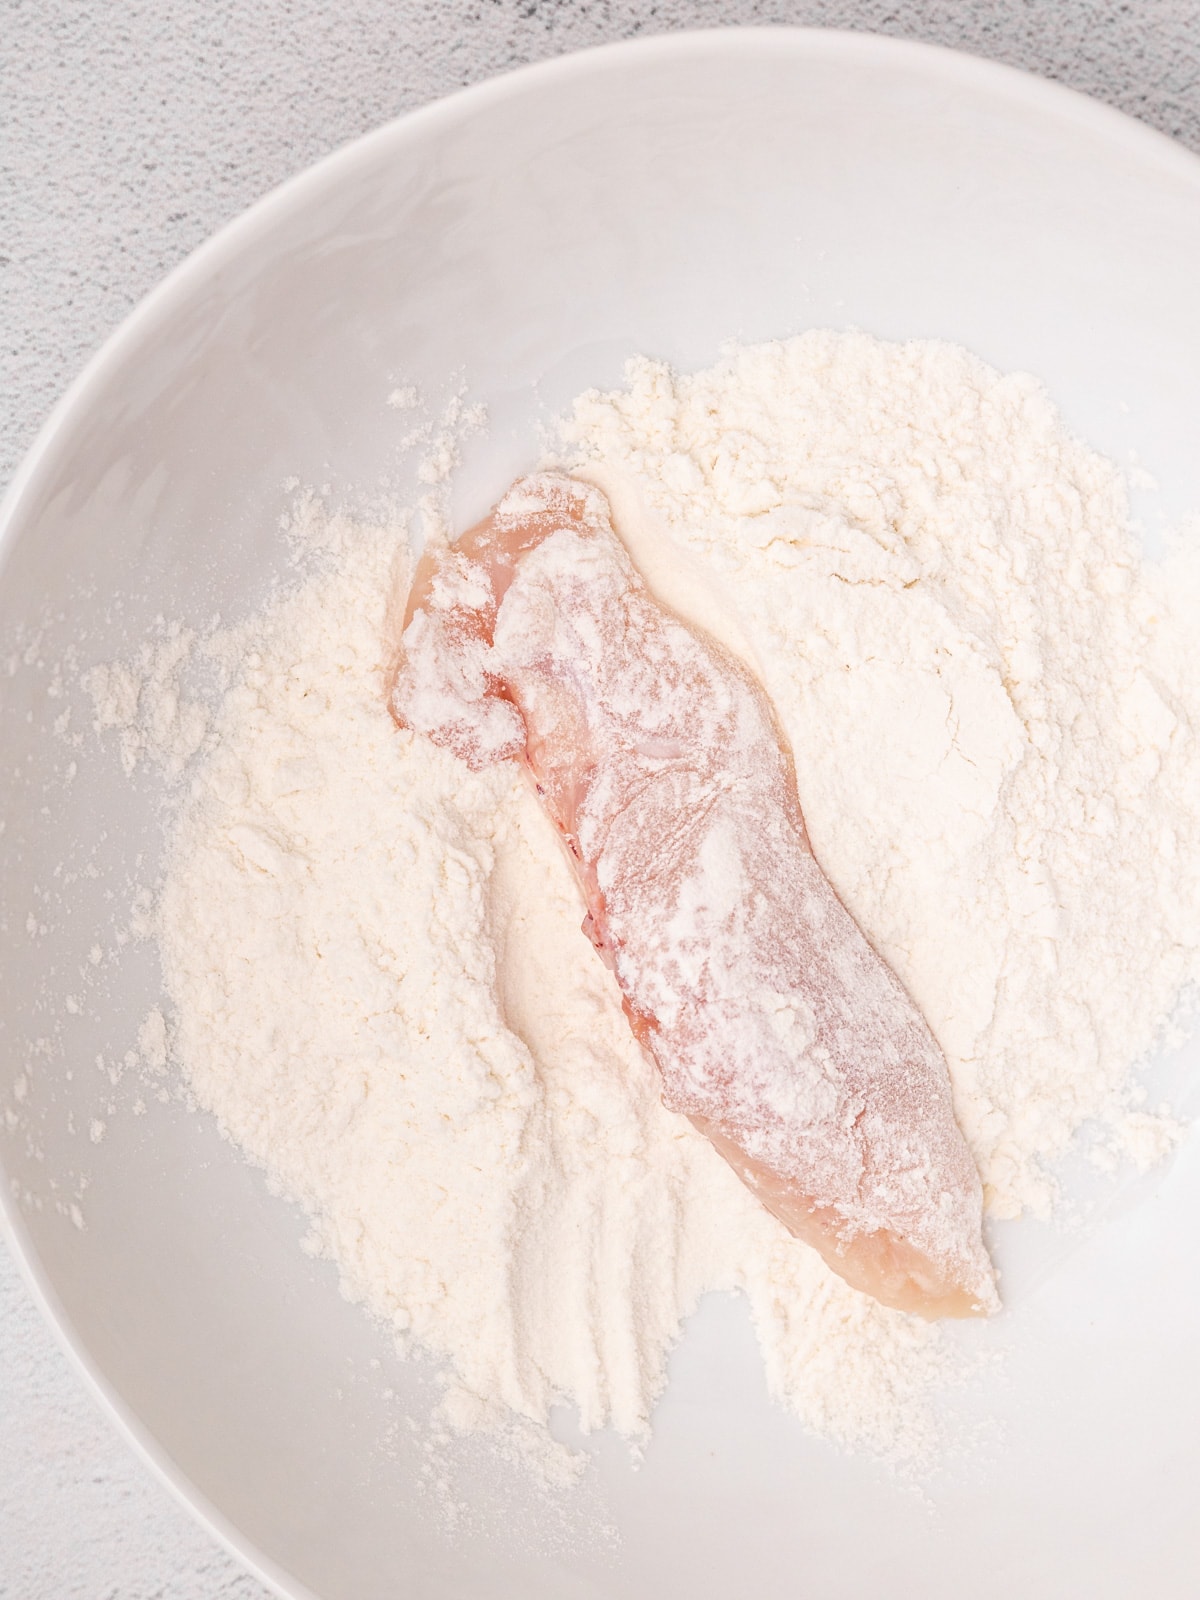 A chicken breast in flour in a white bowl.